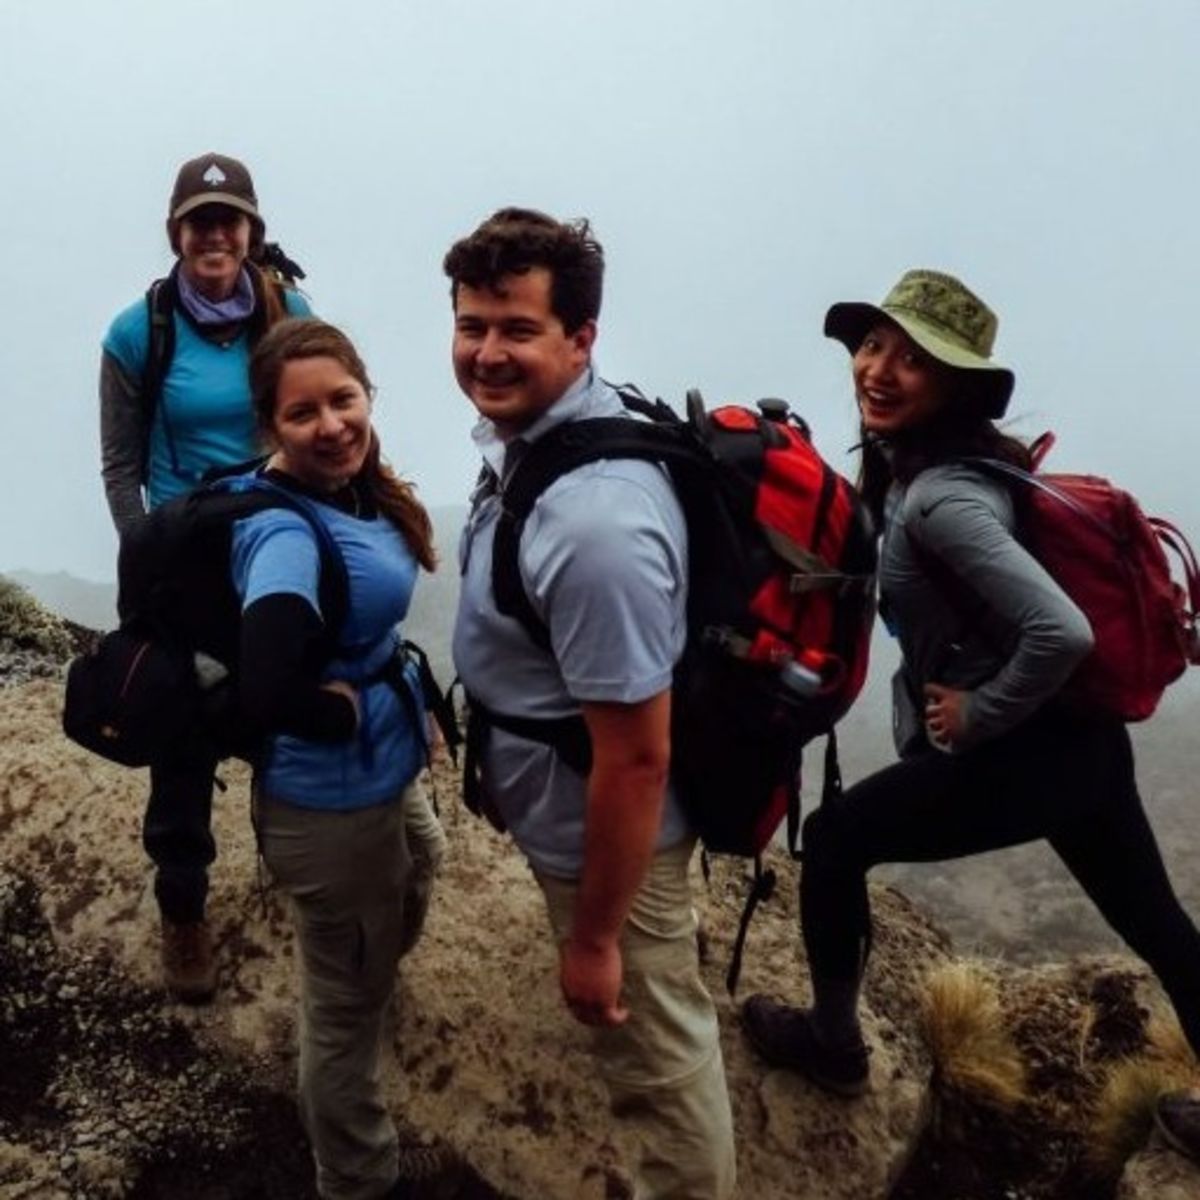 Four friends smiling with mist behind them on Kilimanjaro